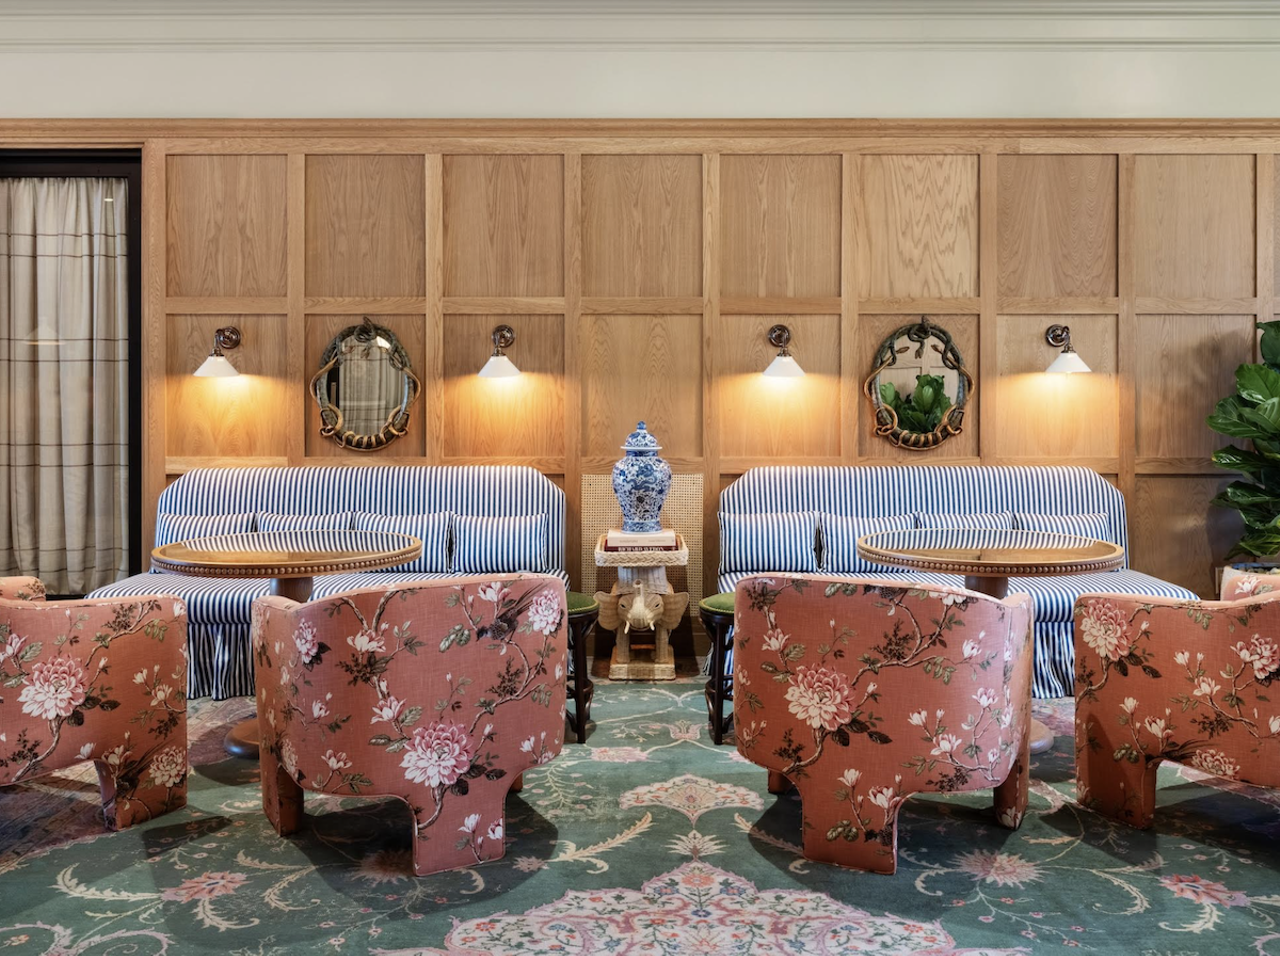 New bar at Hyde Park boutique hotel Palihouse now open to public